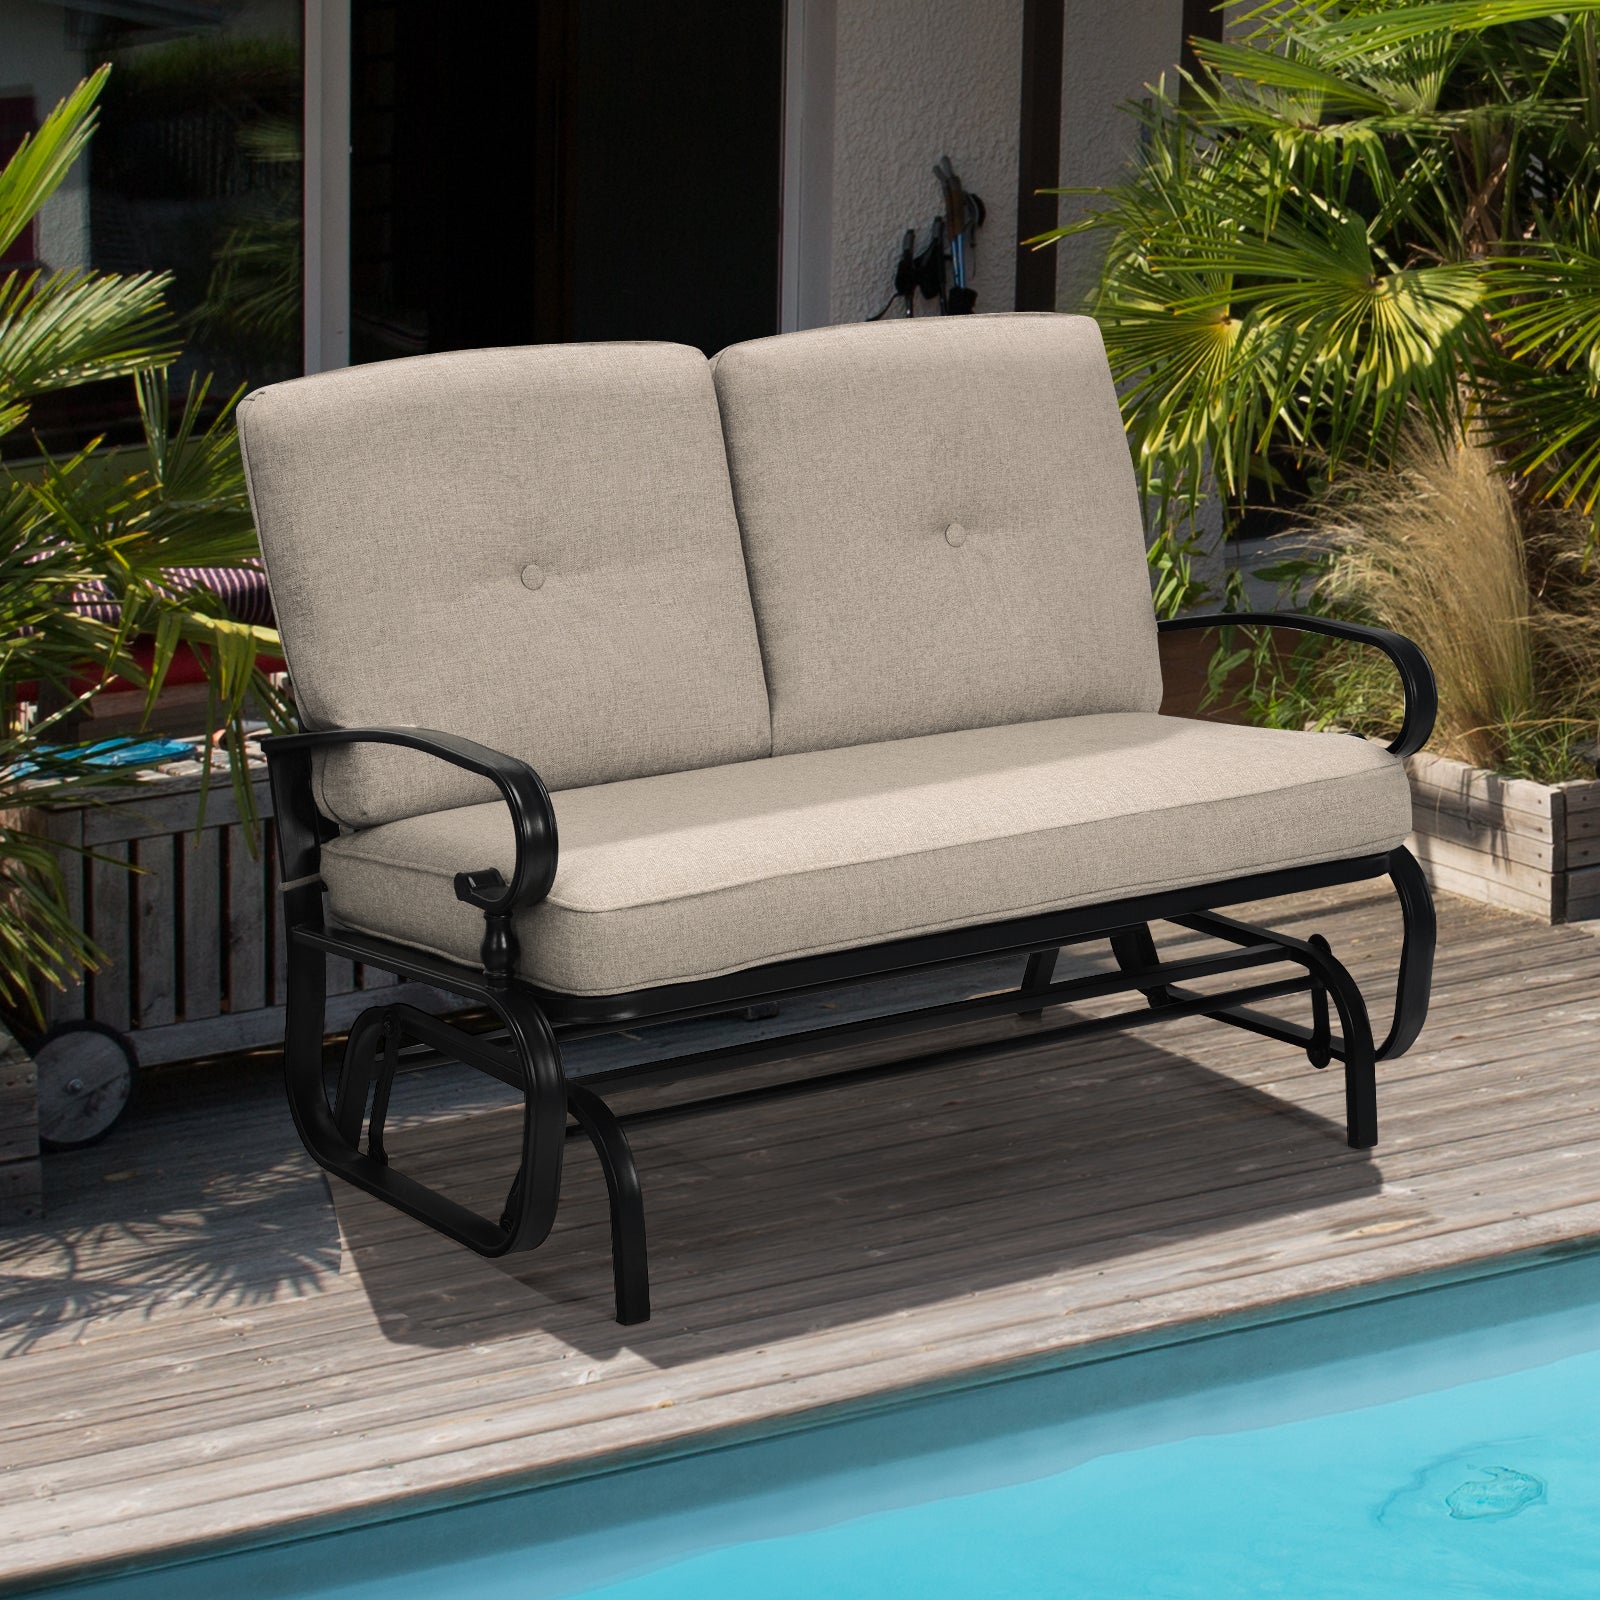 2-Person Patio Glider Chair with Cushions-Beige